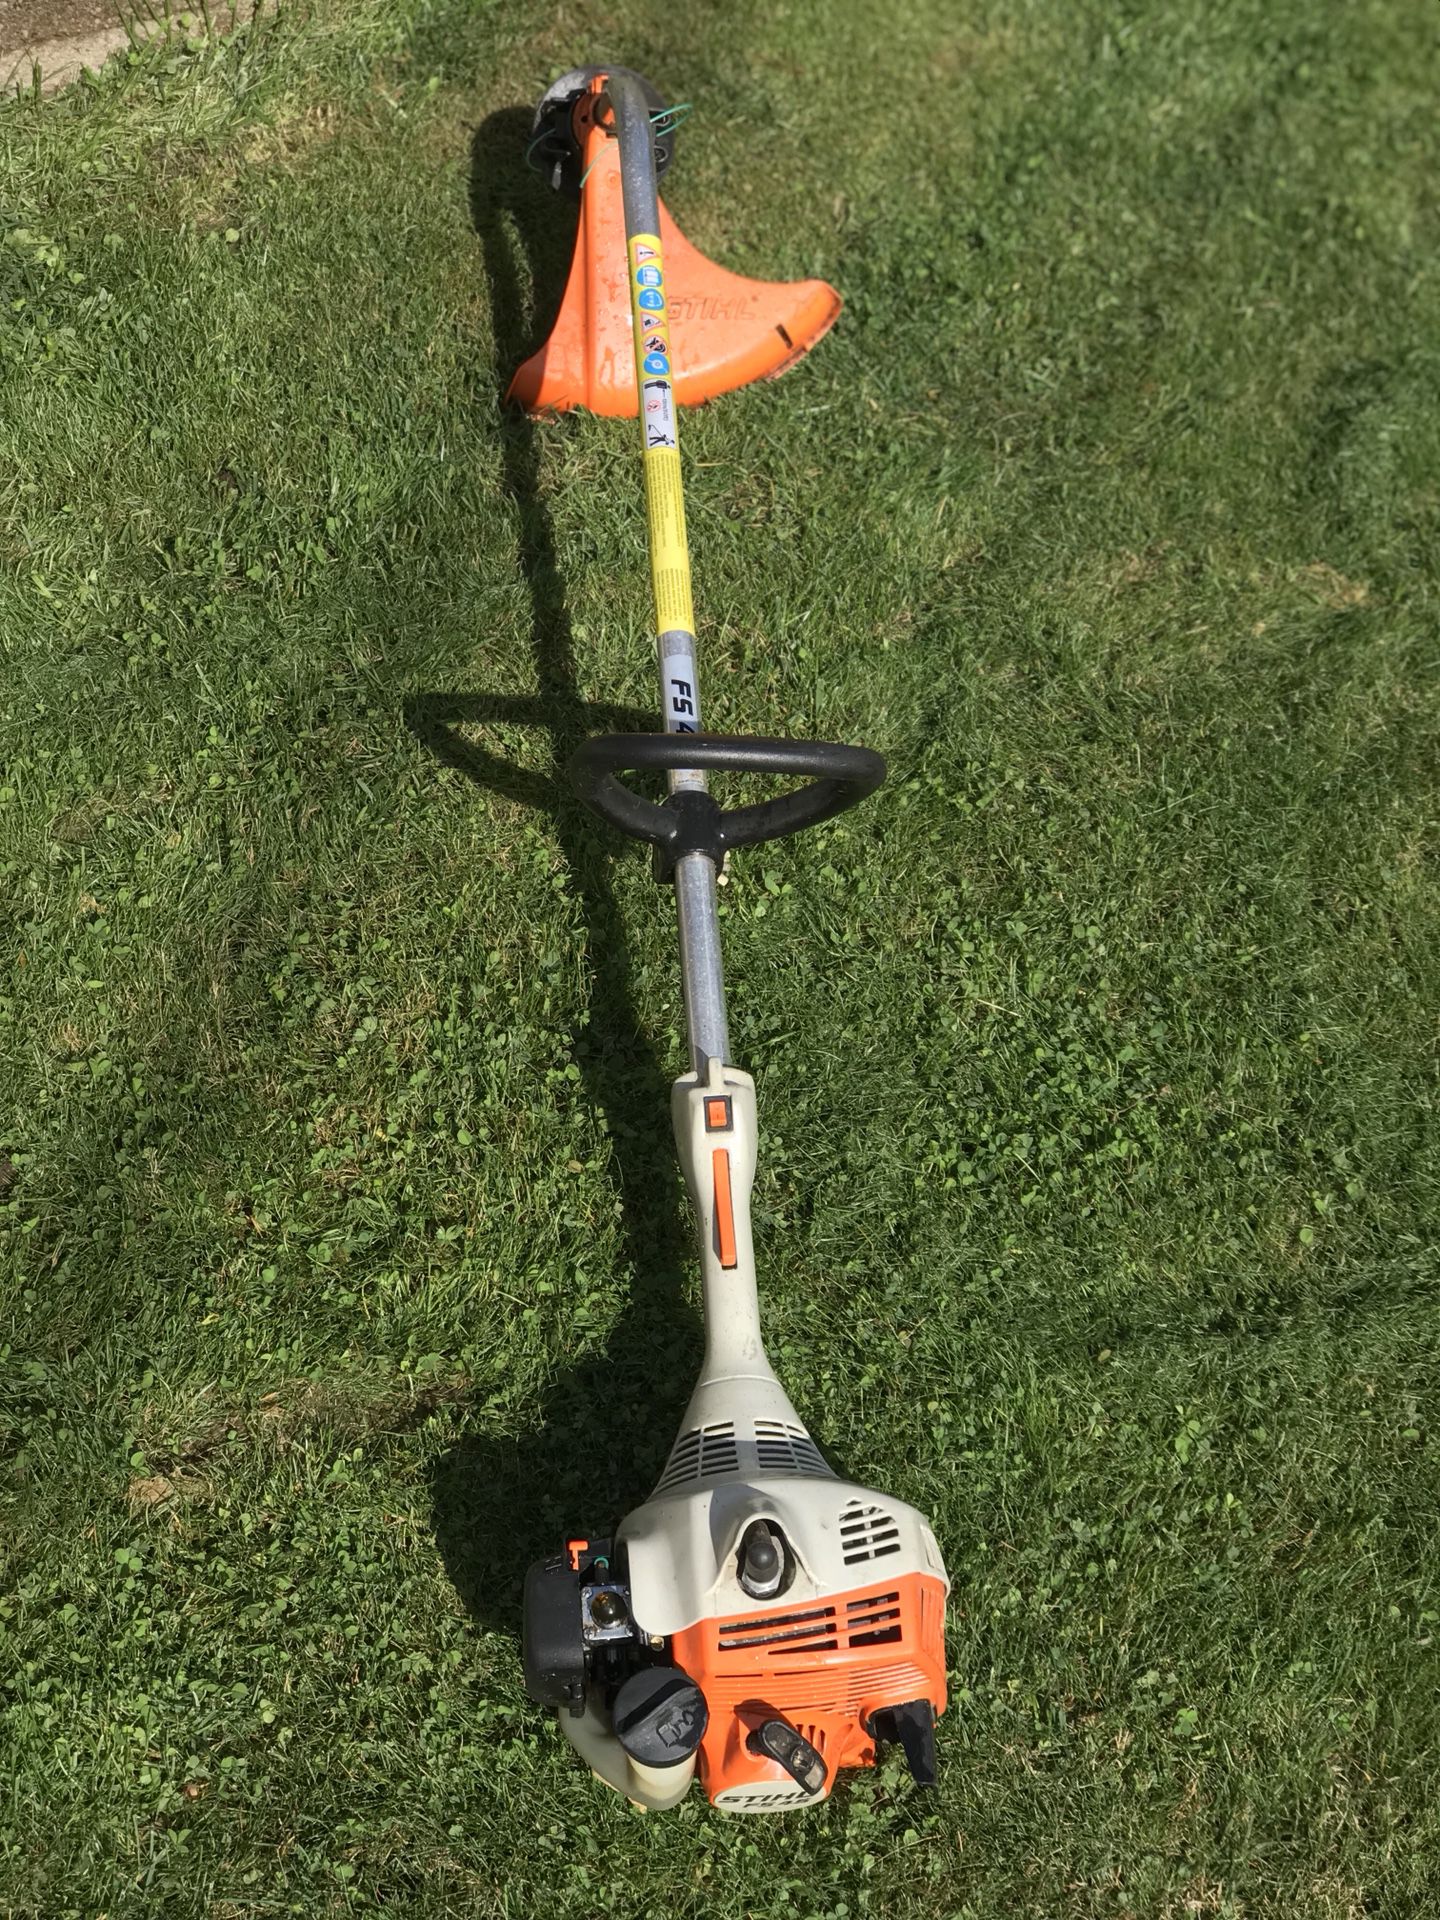 Stihl FS 45 Weed Eater Trimmer